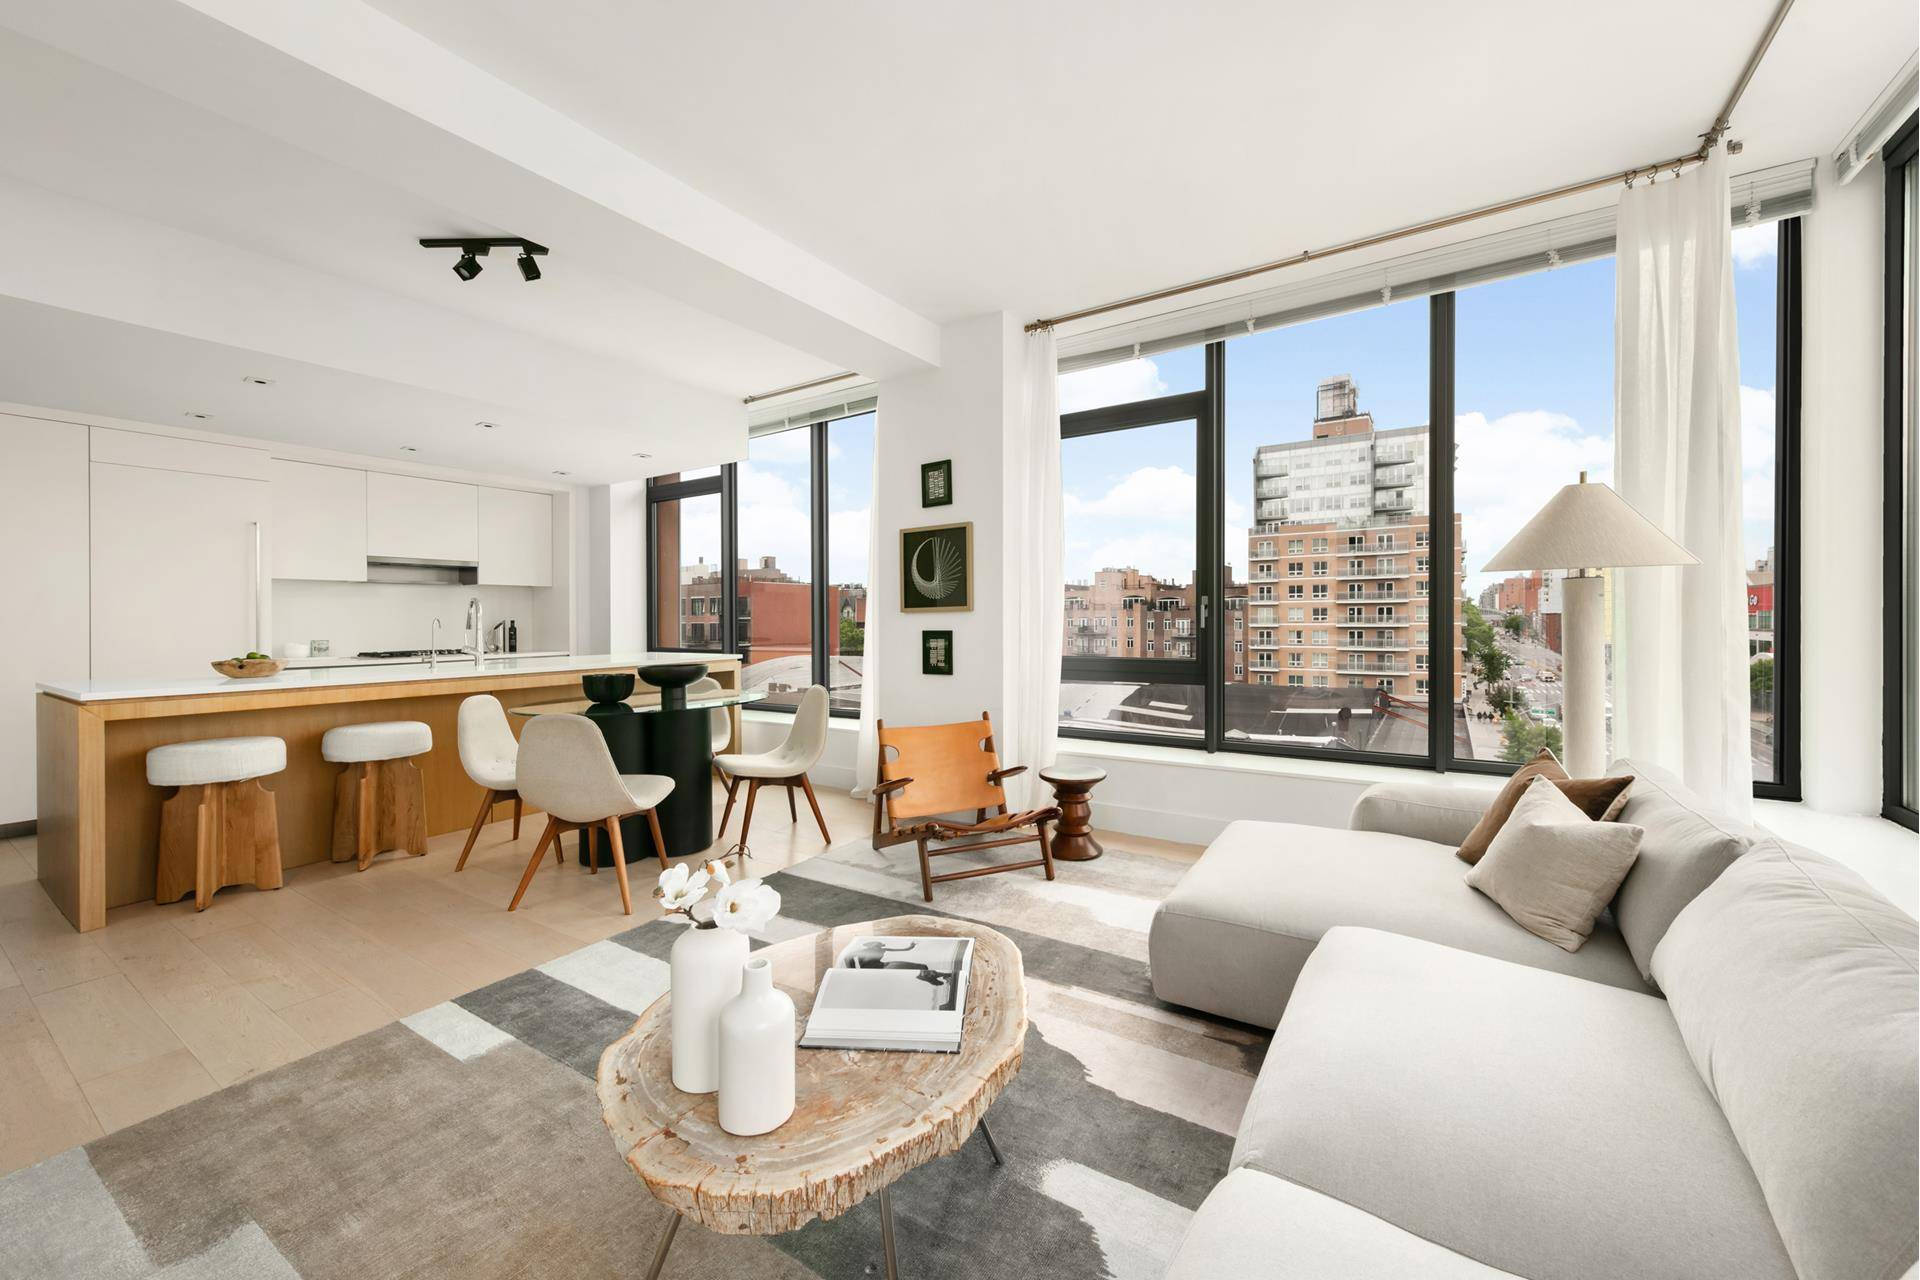 Discover 251 1st Street, a striking creation by ODA New York, featuring thoughtfully designed layouts and premium finishes in a vibrant Brooklyn neighborhood.